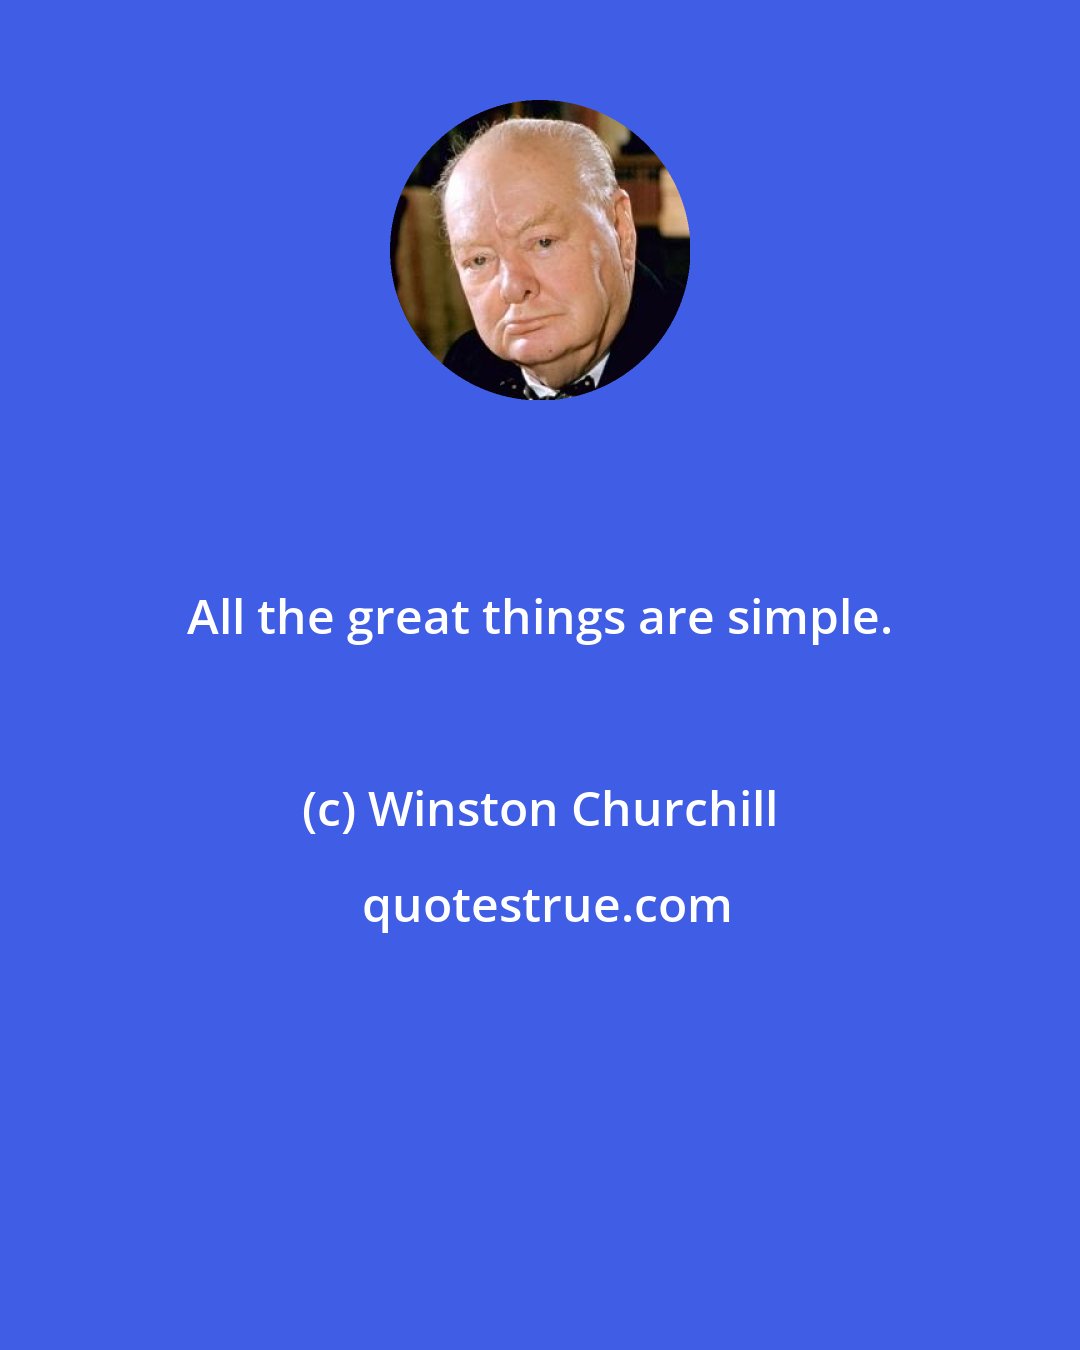 Winston Churchill: All the great things are simple.